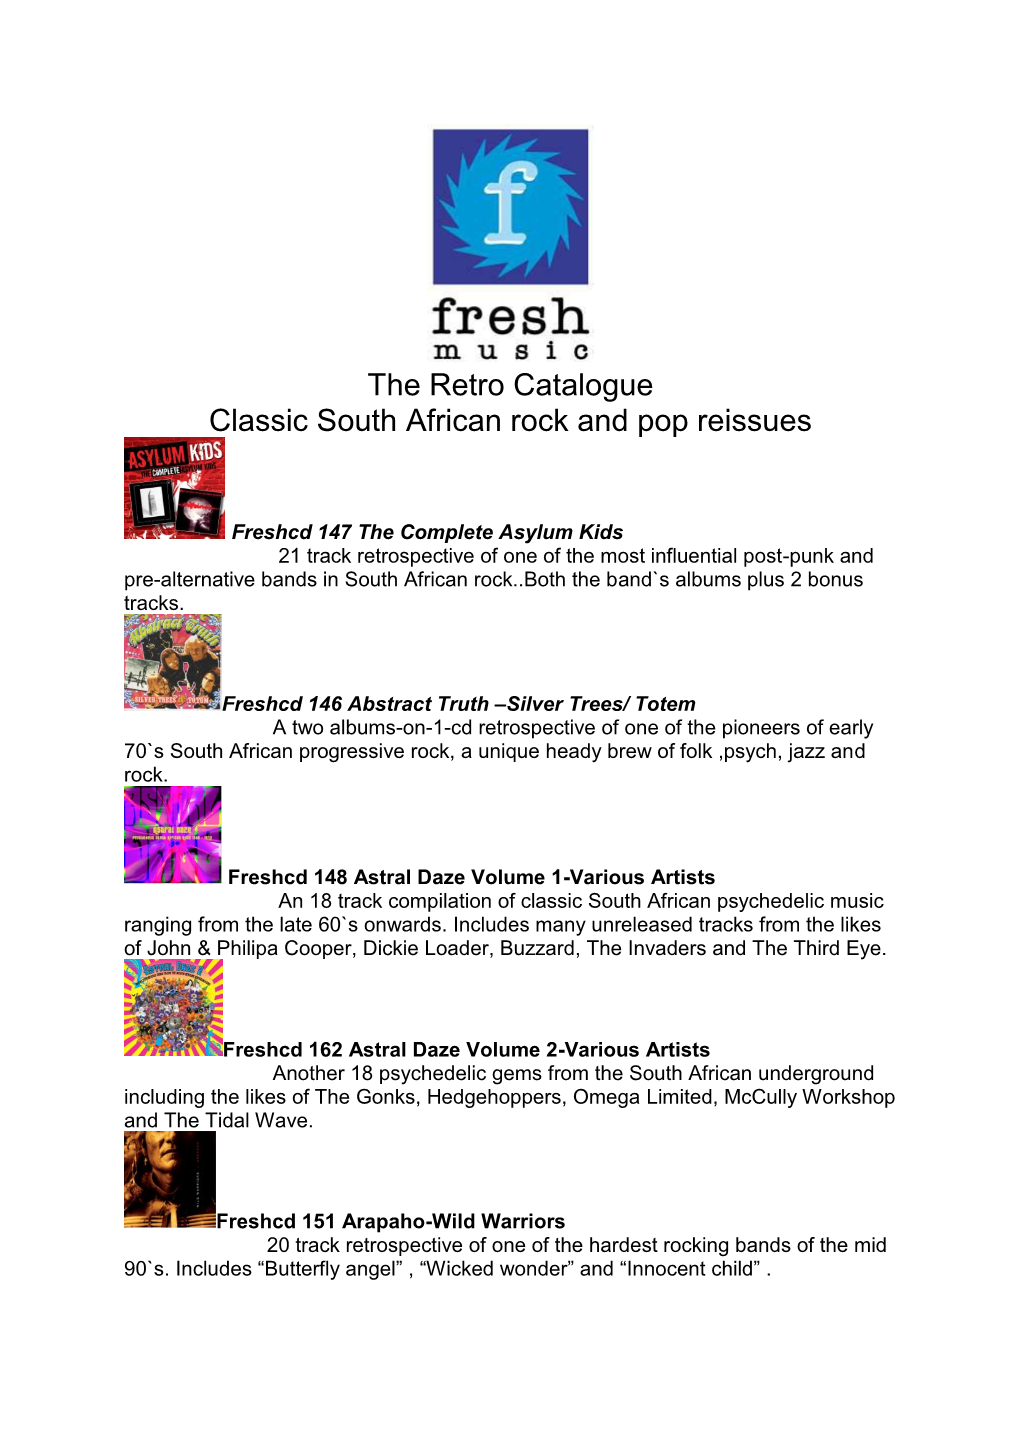 The Retro Catalogue Classic South African Rock and Pop Reissues